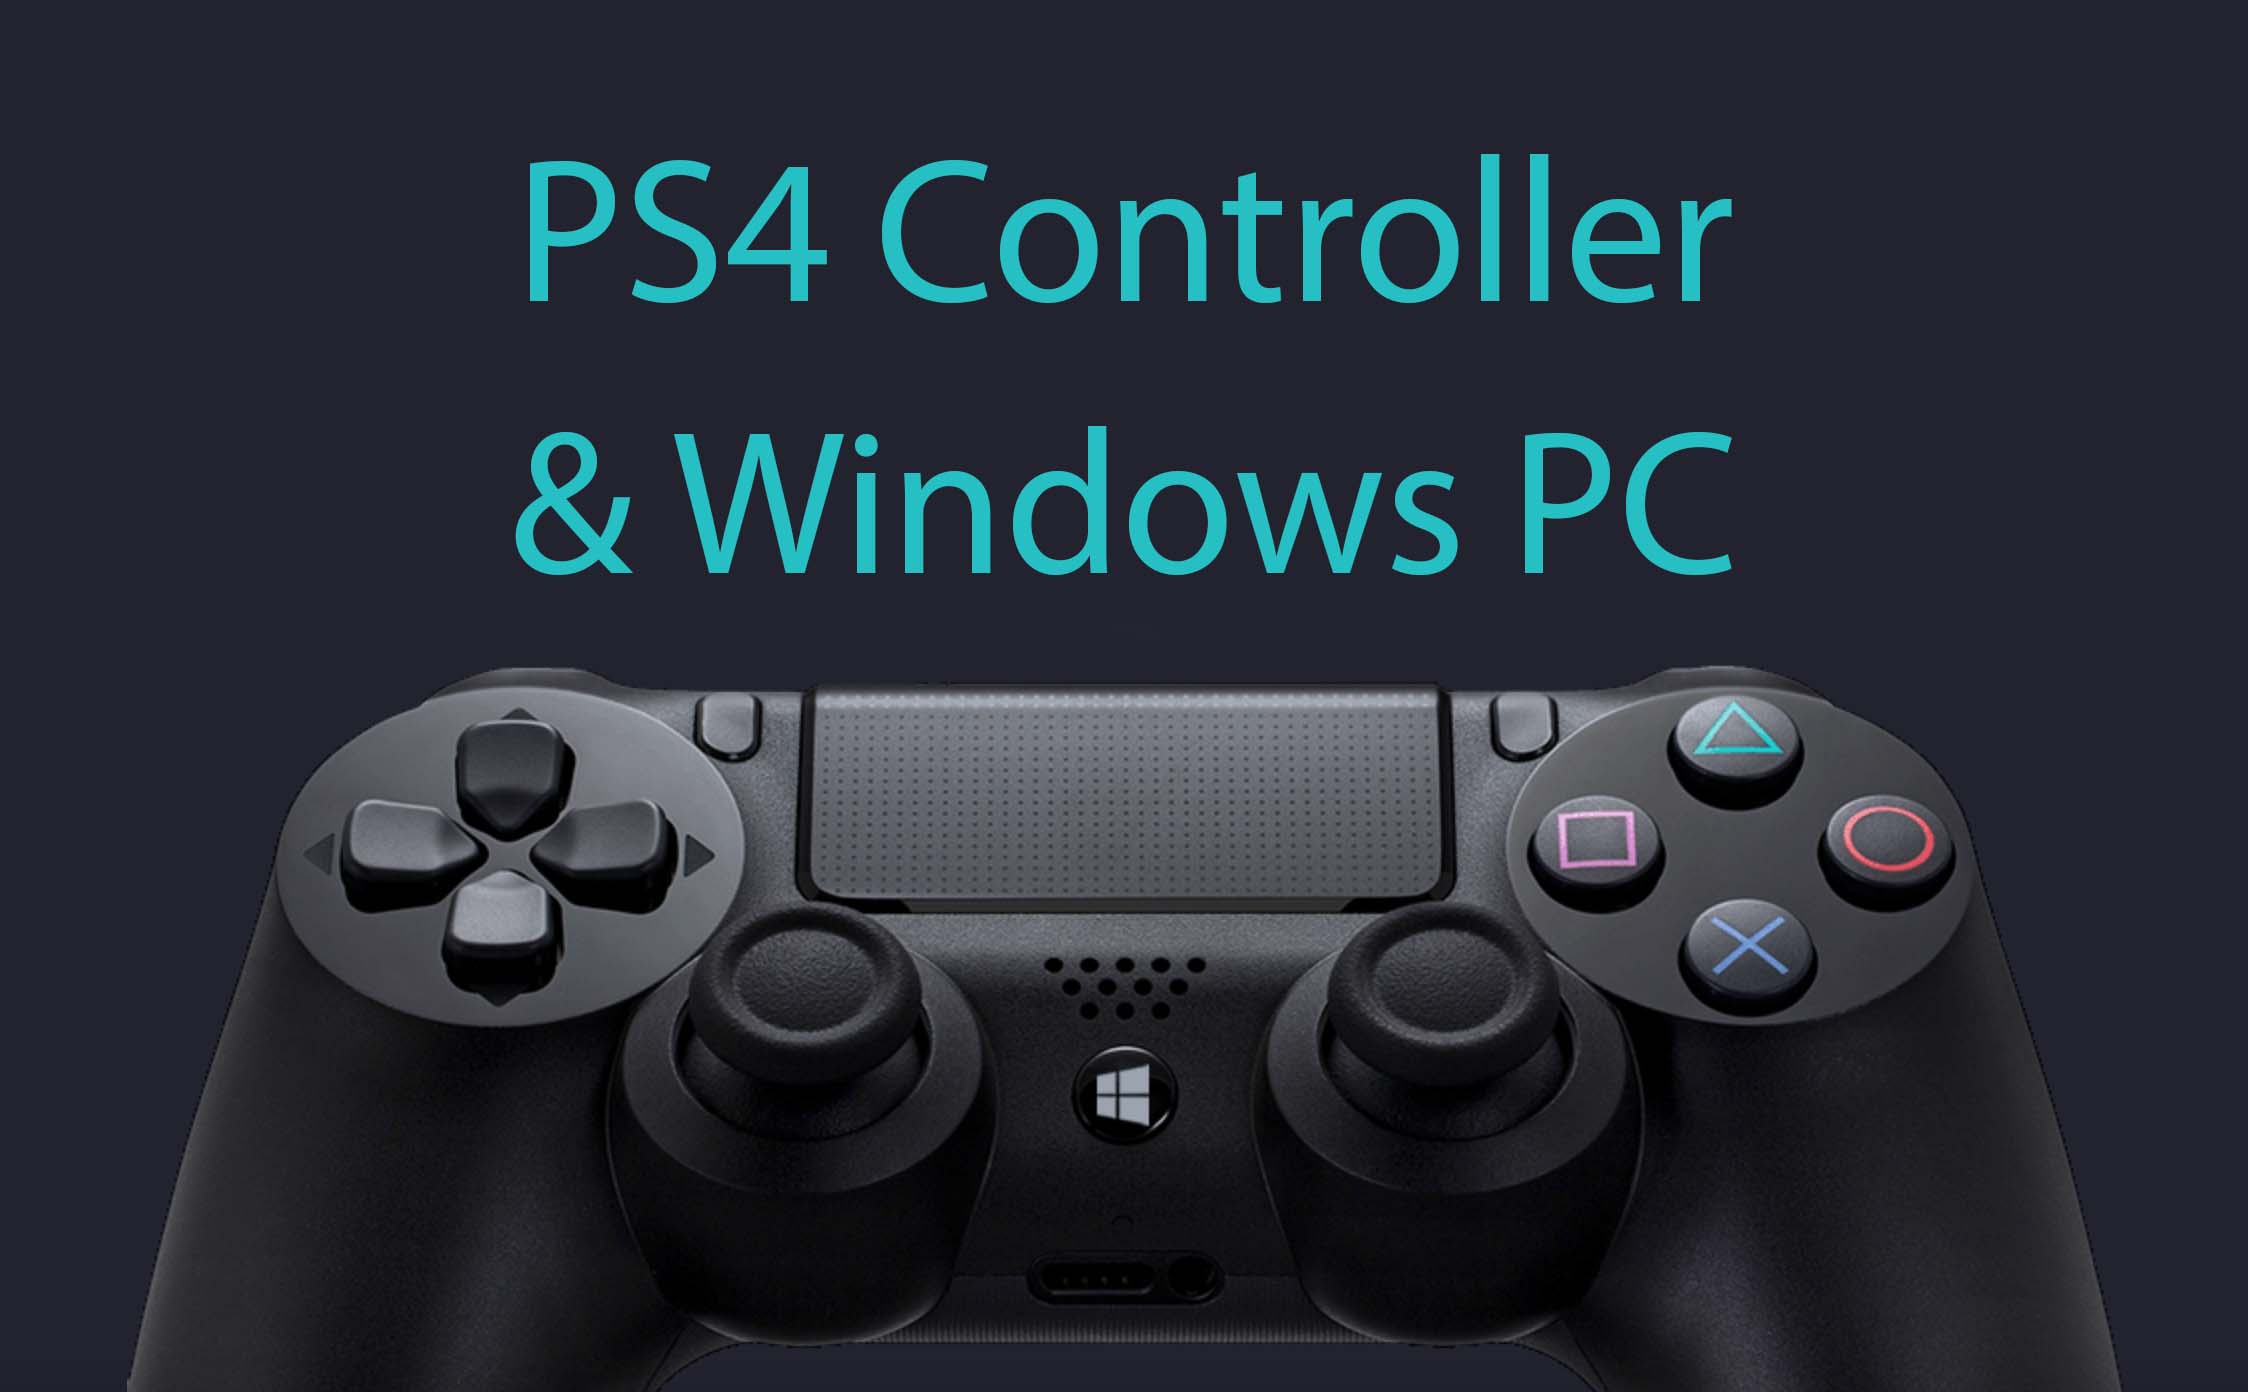 diefstal samen Verbazingwekkend Connect PS4 controller to PC - 2 ways and a super tip